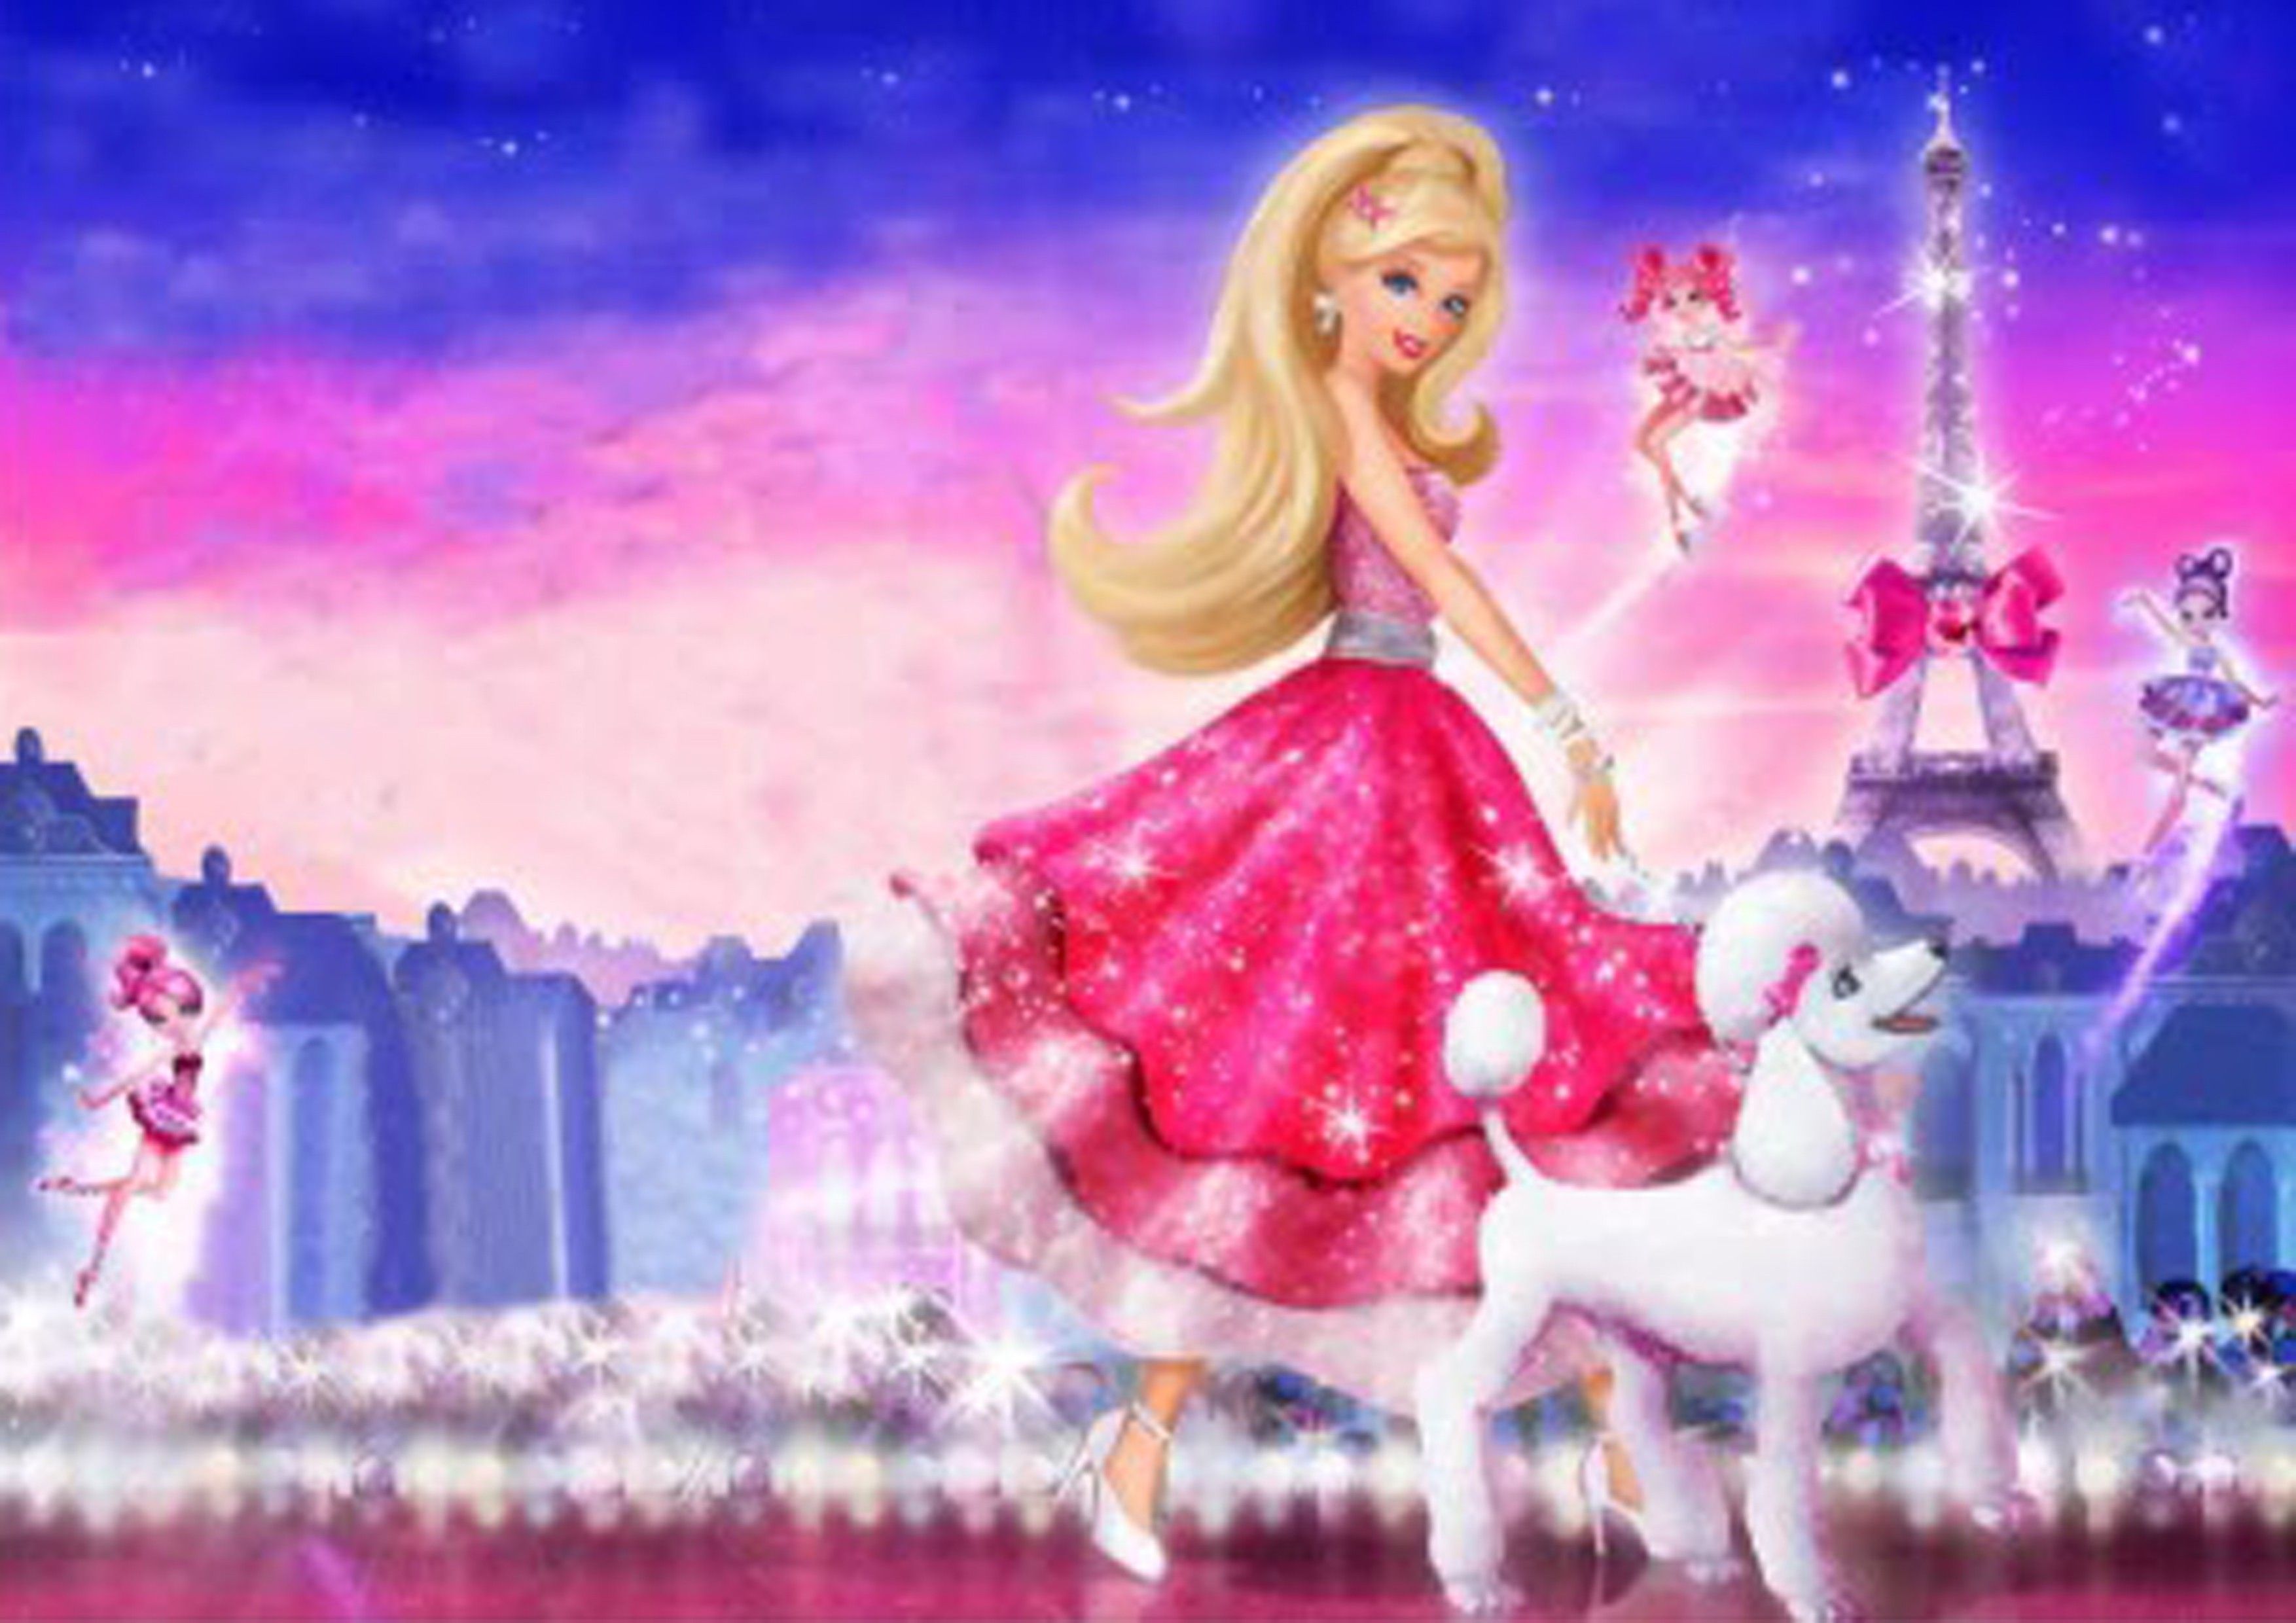 barbie girl wallpaper,pink,animated cartoon,doll,fictional character,barbie